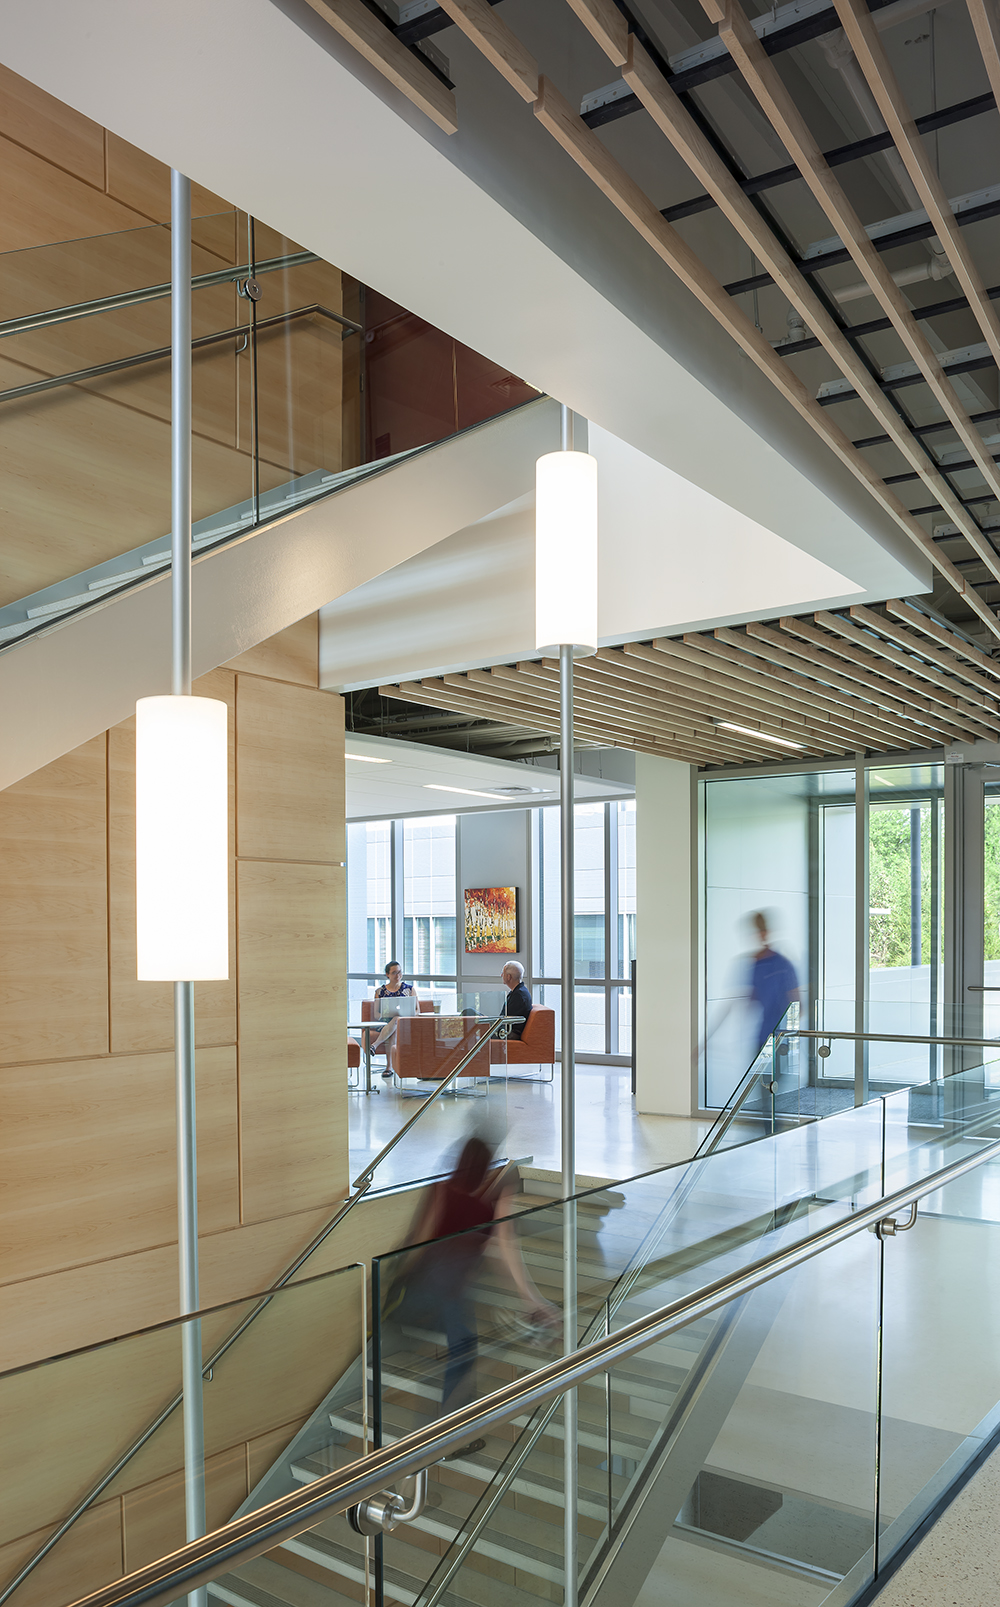 Sequence pendants enhance educational interior design in a tandem-mount configuration for a modern campus building stairwell.